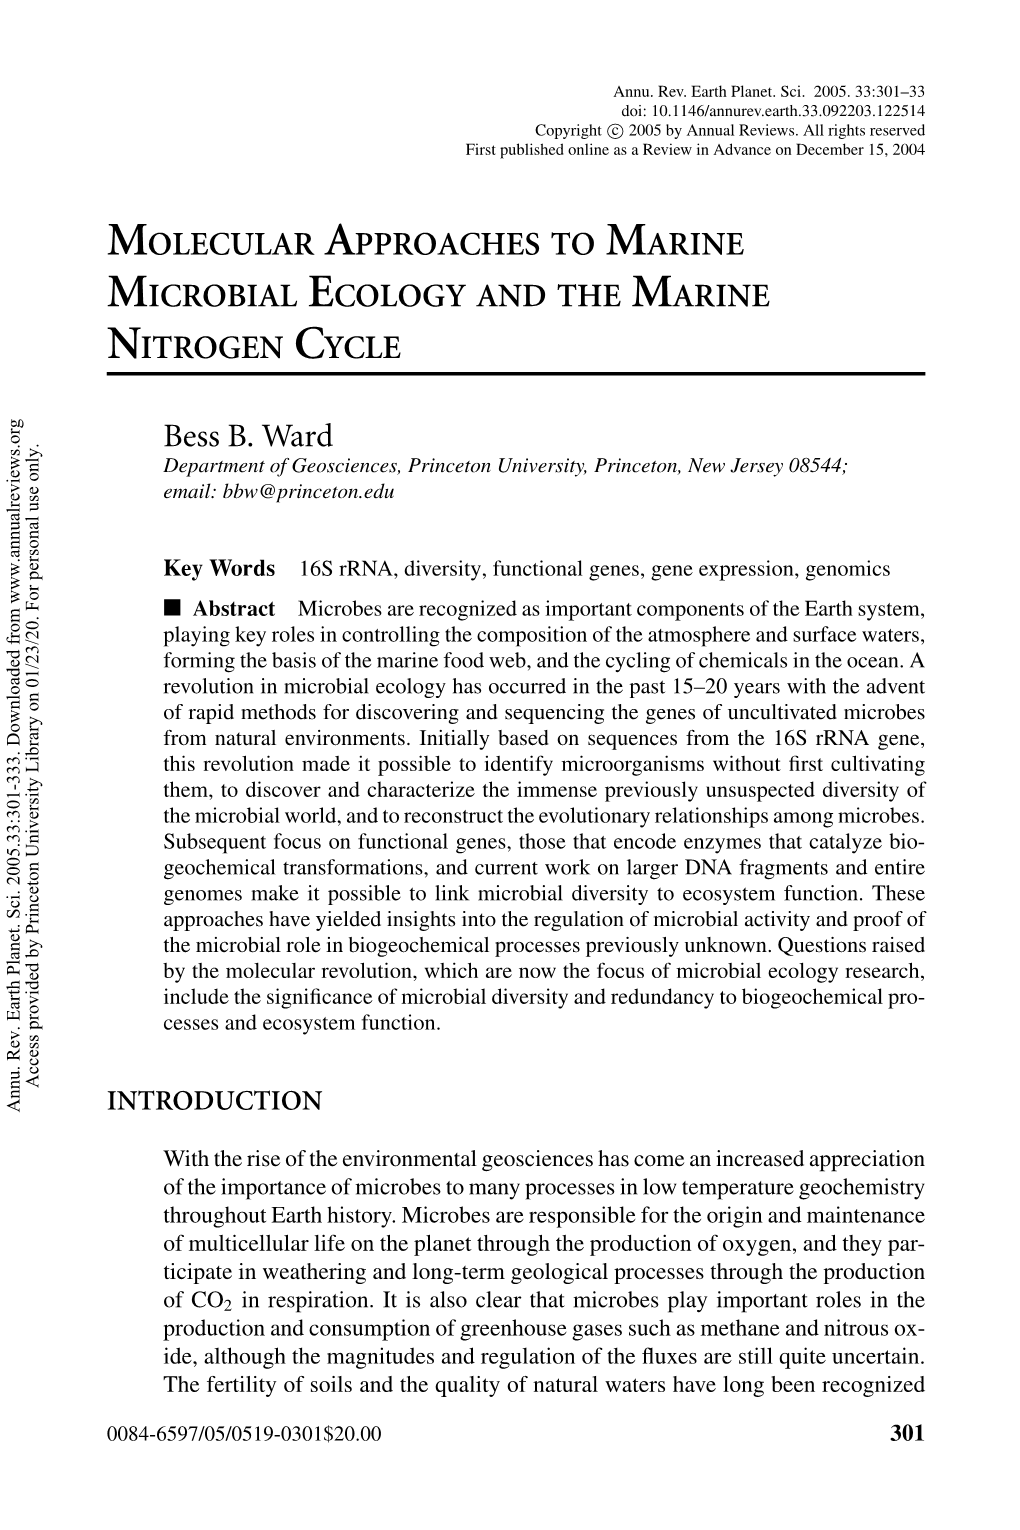 Molecular Approaches to Marine Microbial Ecology and the Marine Nitrogen Cycle